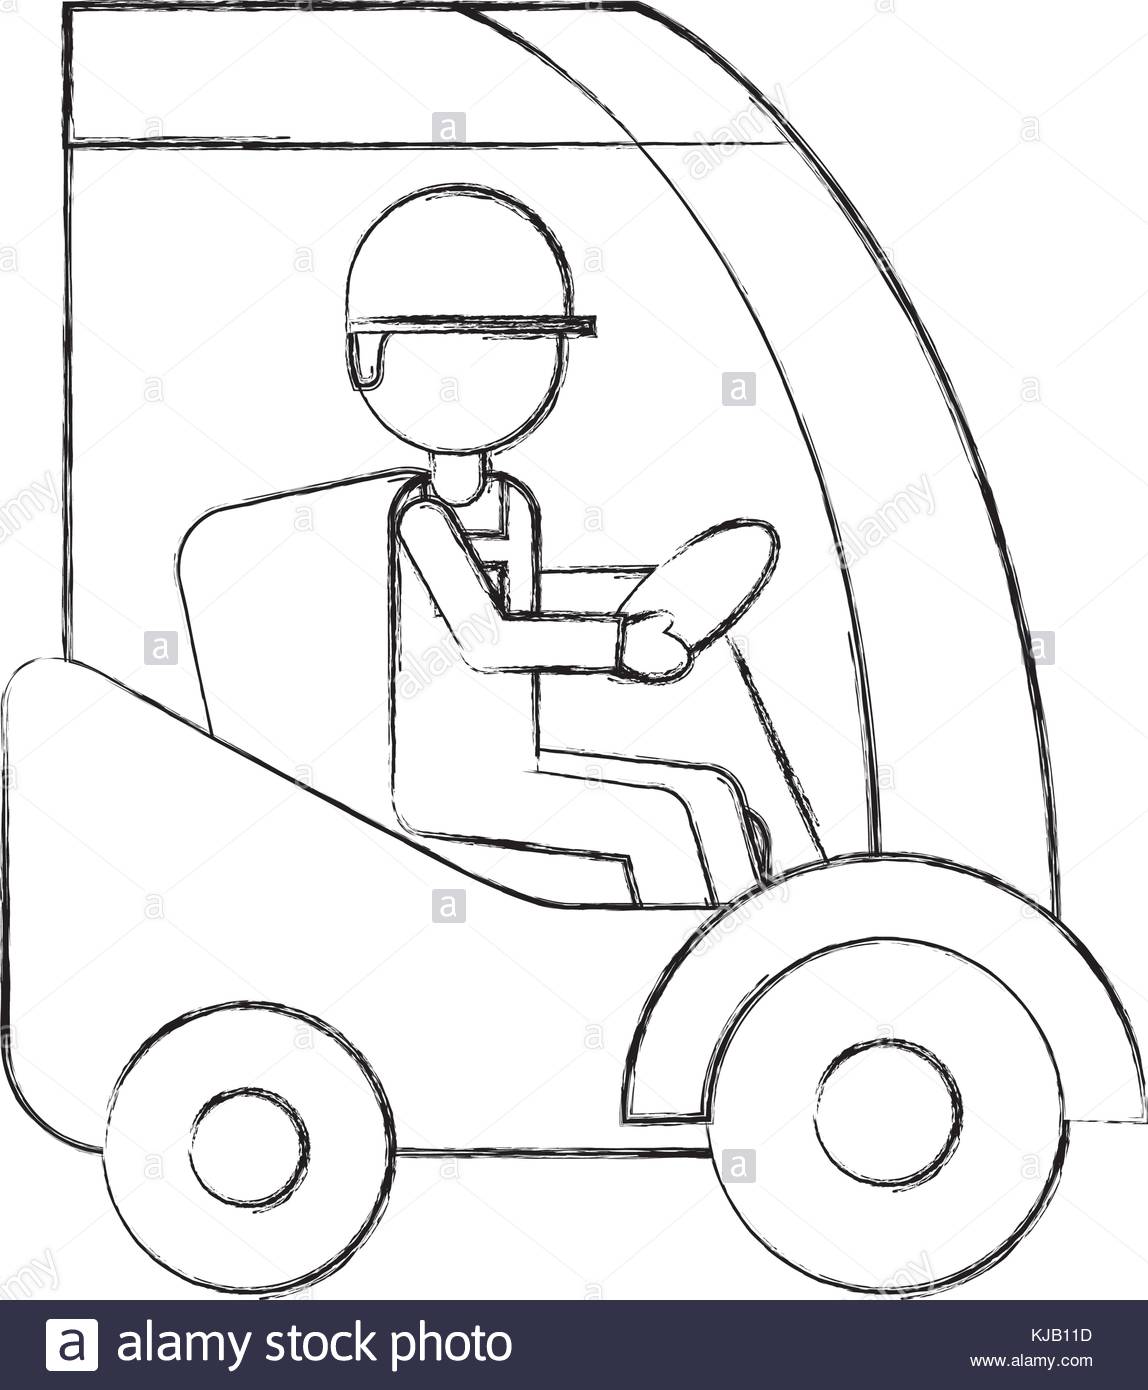 The best free Driver drawing images. Download from 297 free drawings of